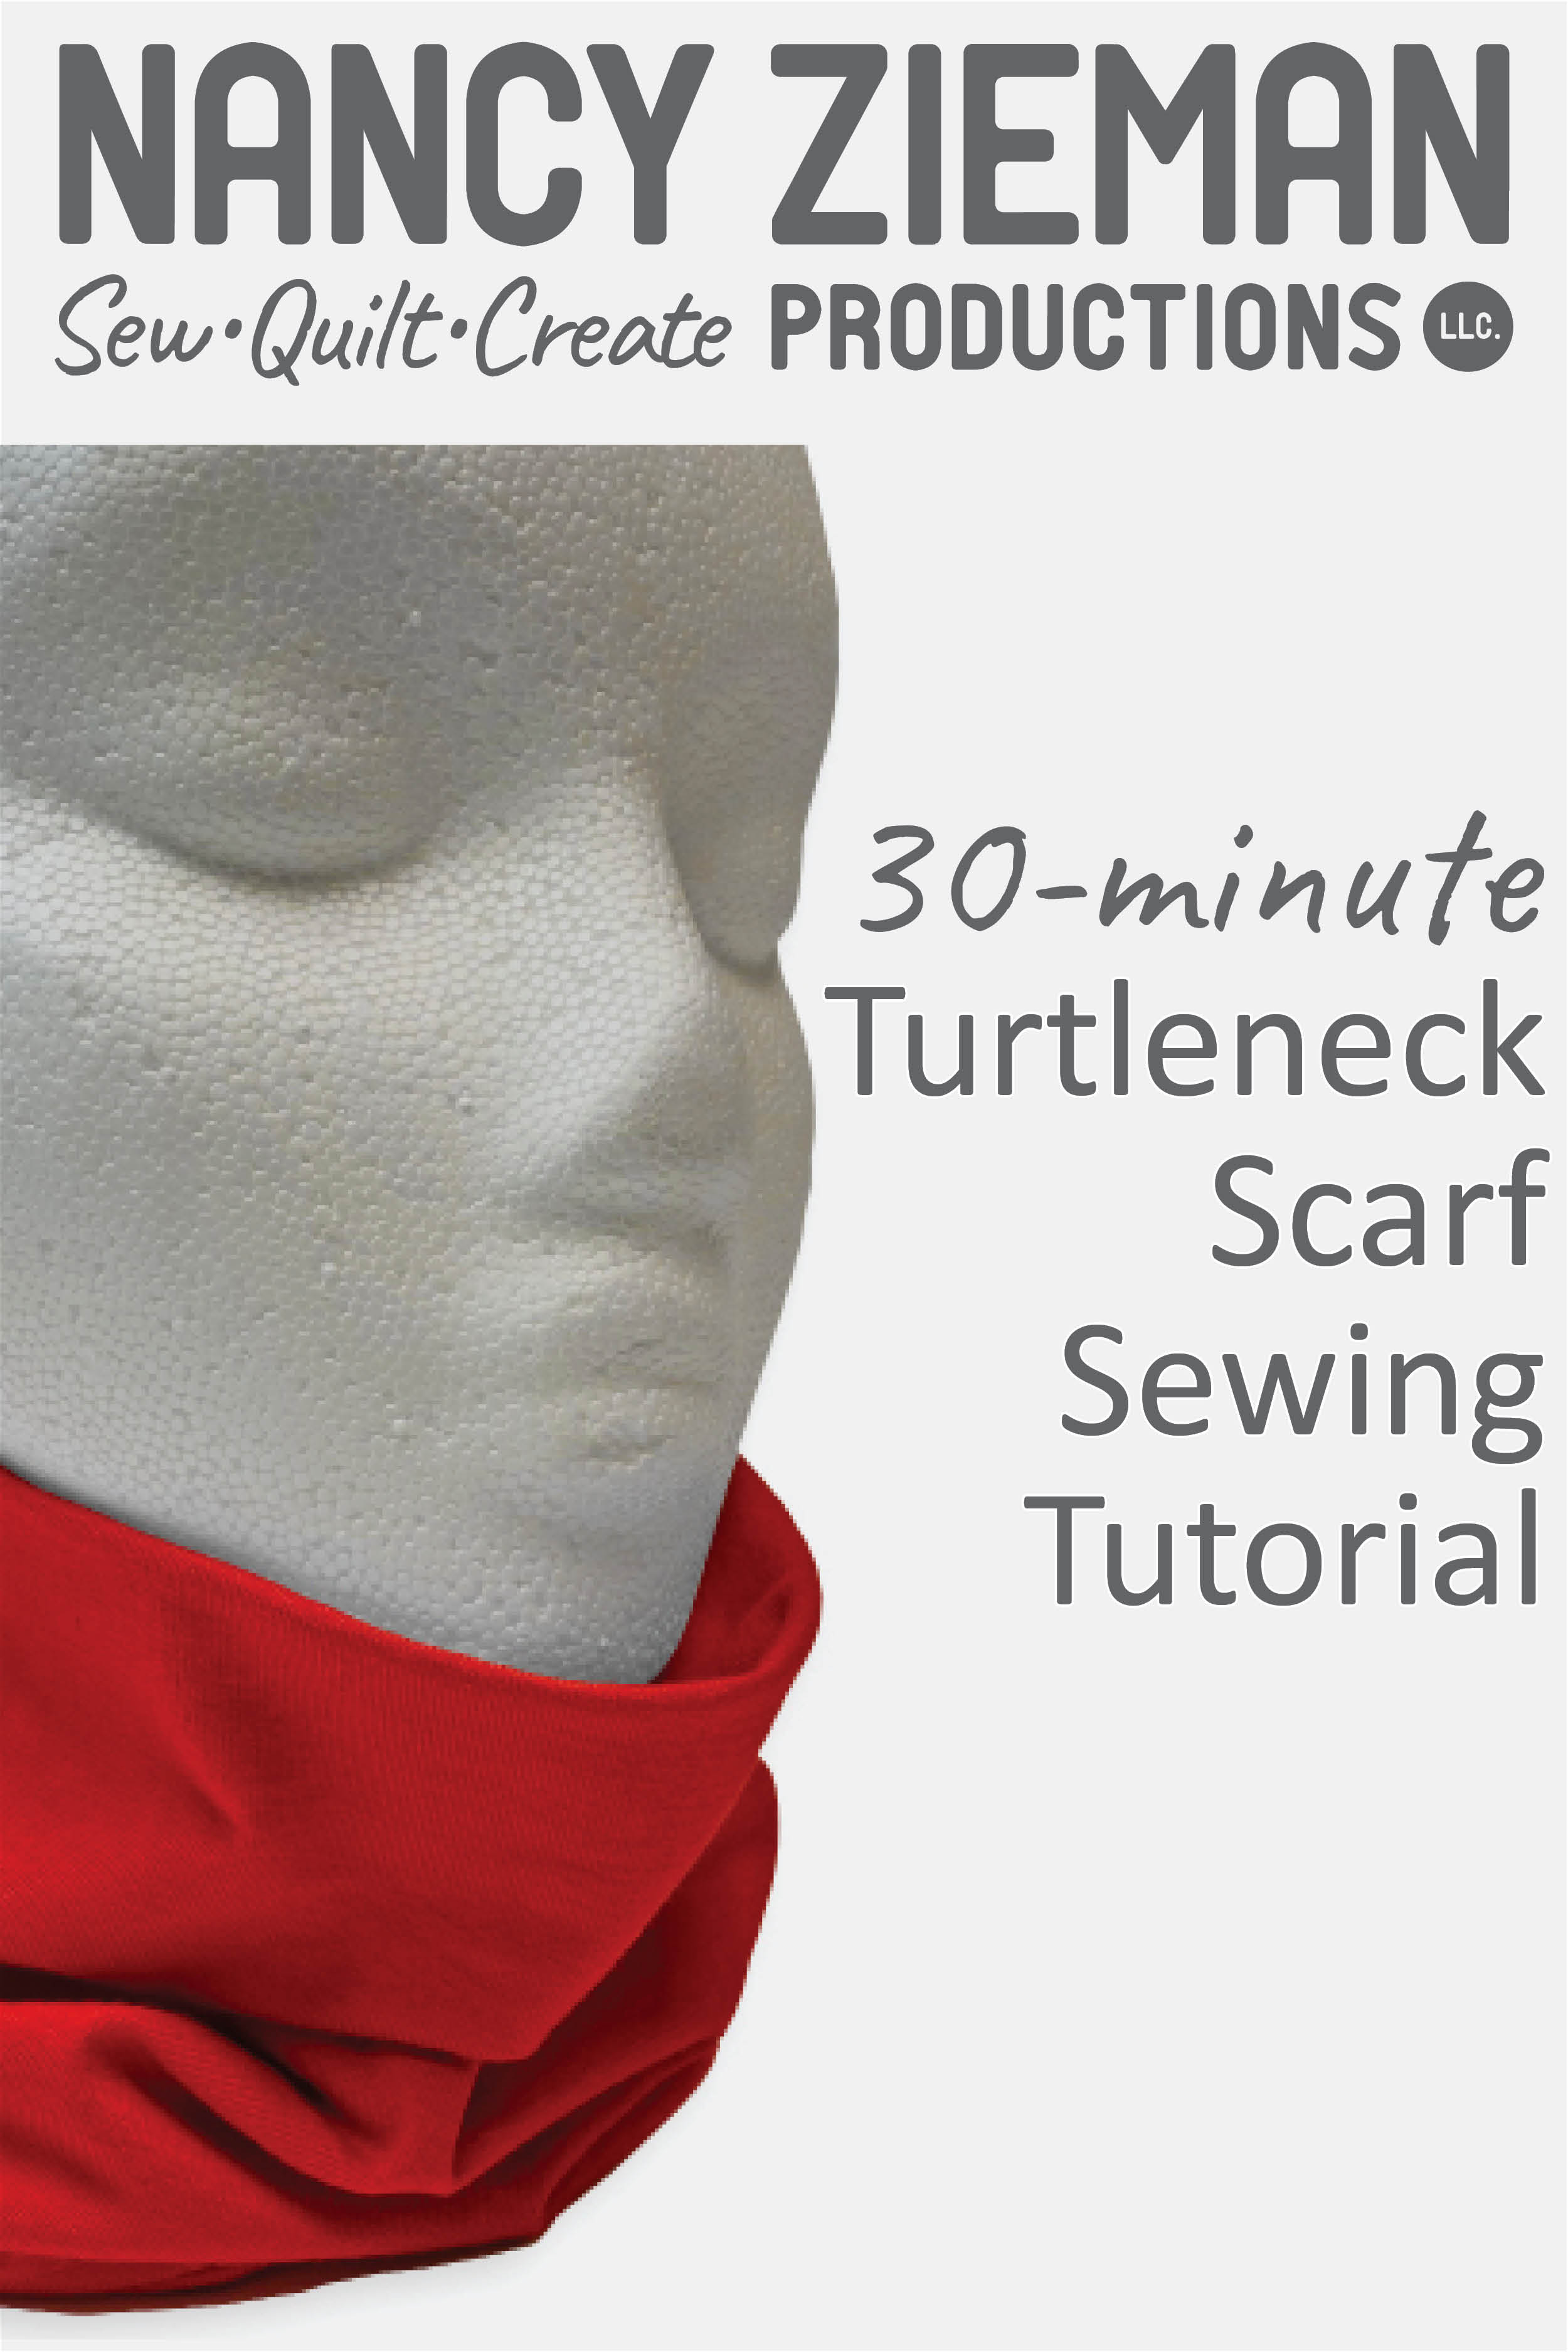 Turtleneck Scarf Sewing Tutorial by The Nancy Zieman Productions Team at the NZP Blog